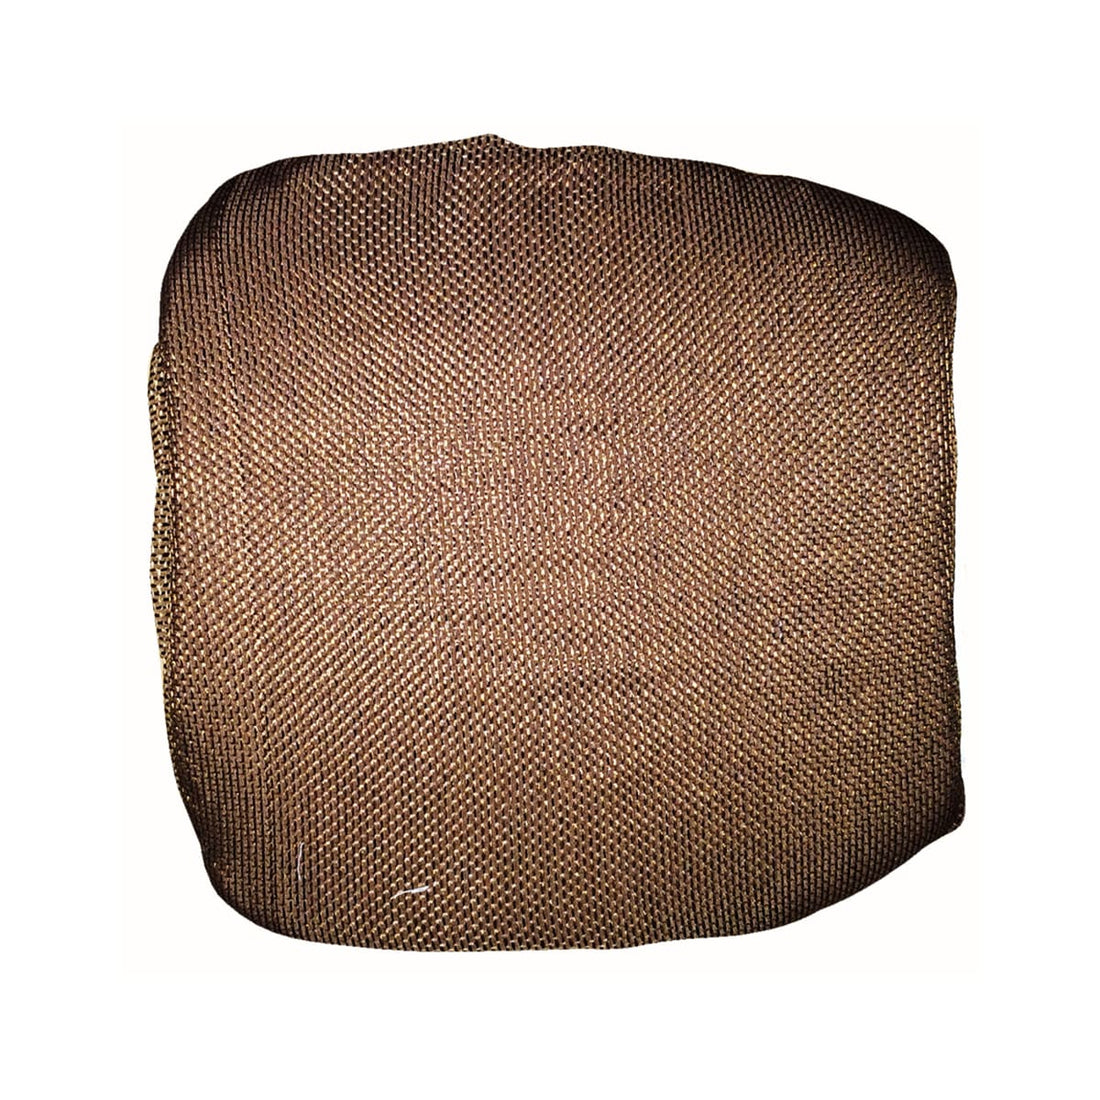 ANTONELLA 42X42 CM CHAIR COVER WITH BROWN ELASTIC BAND